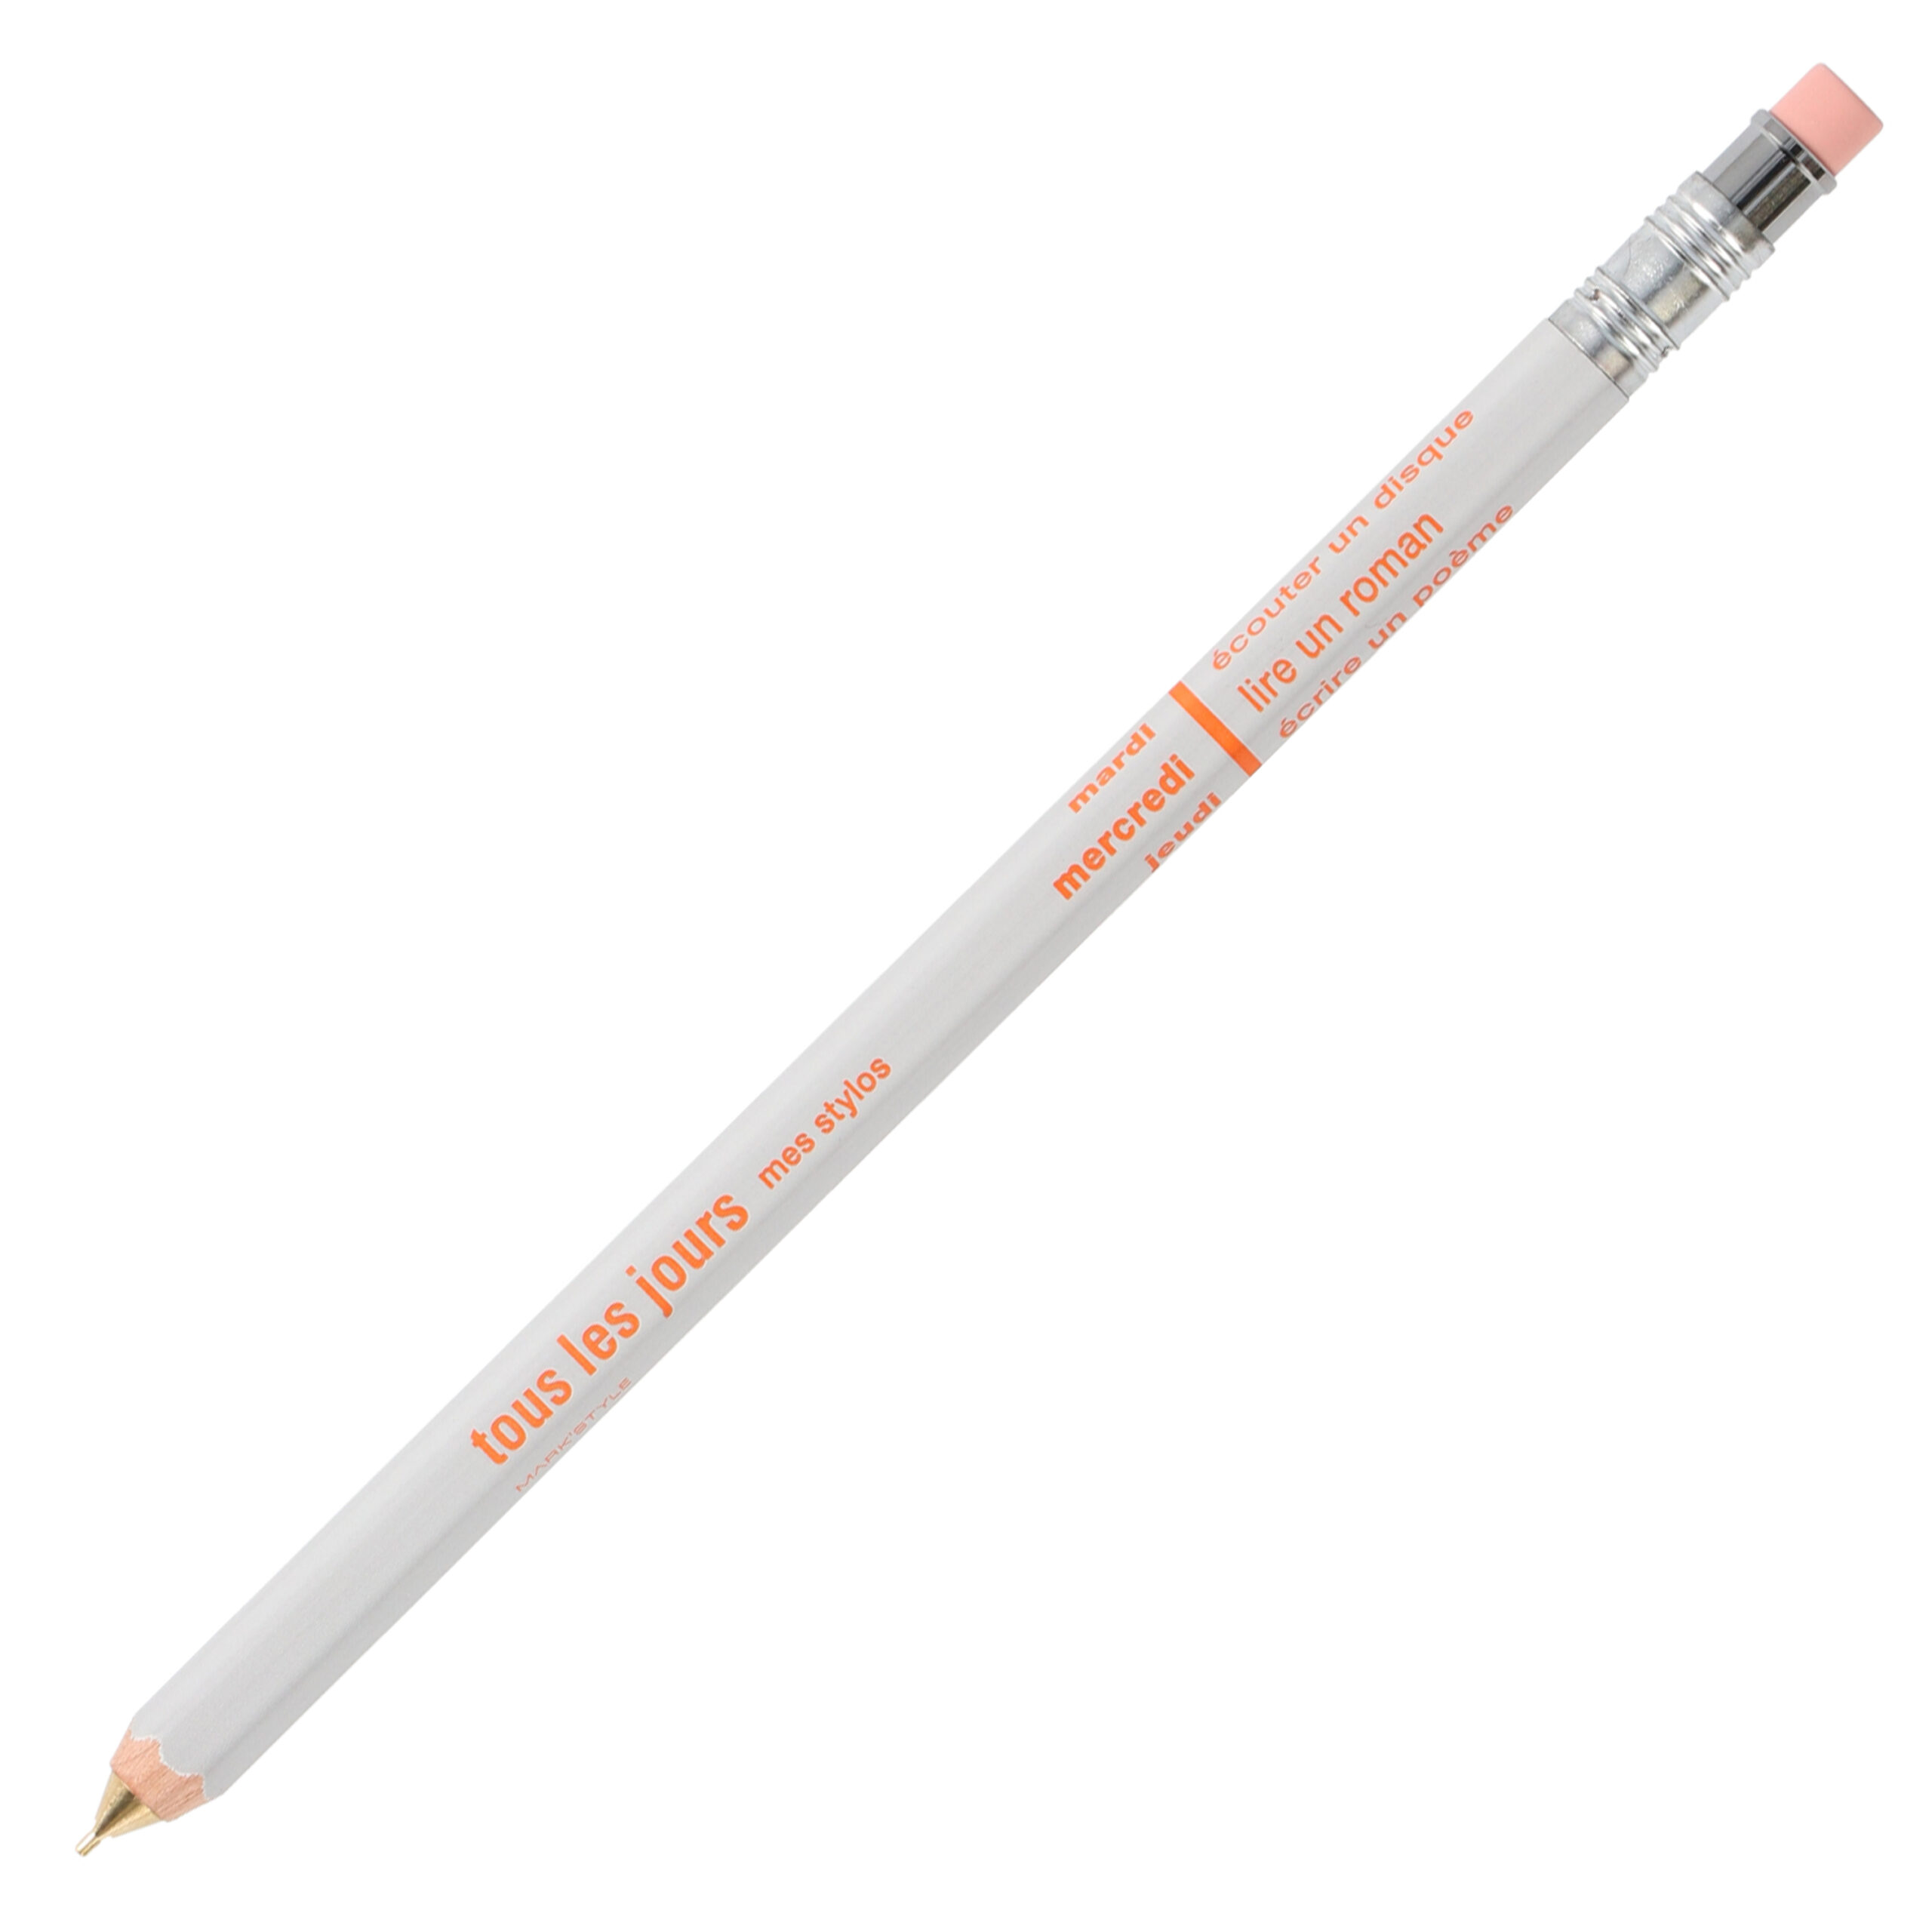 DAY-SH3-CGY - Cool Gray - Mechanical Pencil with Eraser - MARK'STYLE - tous les jours